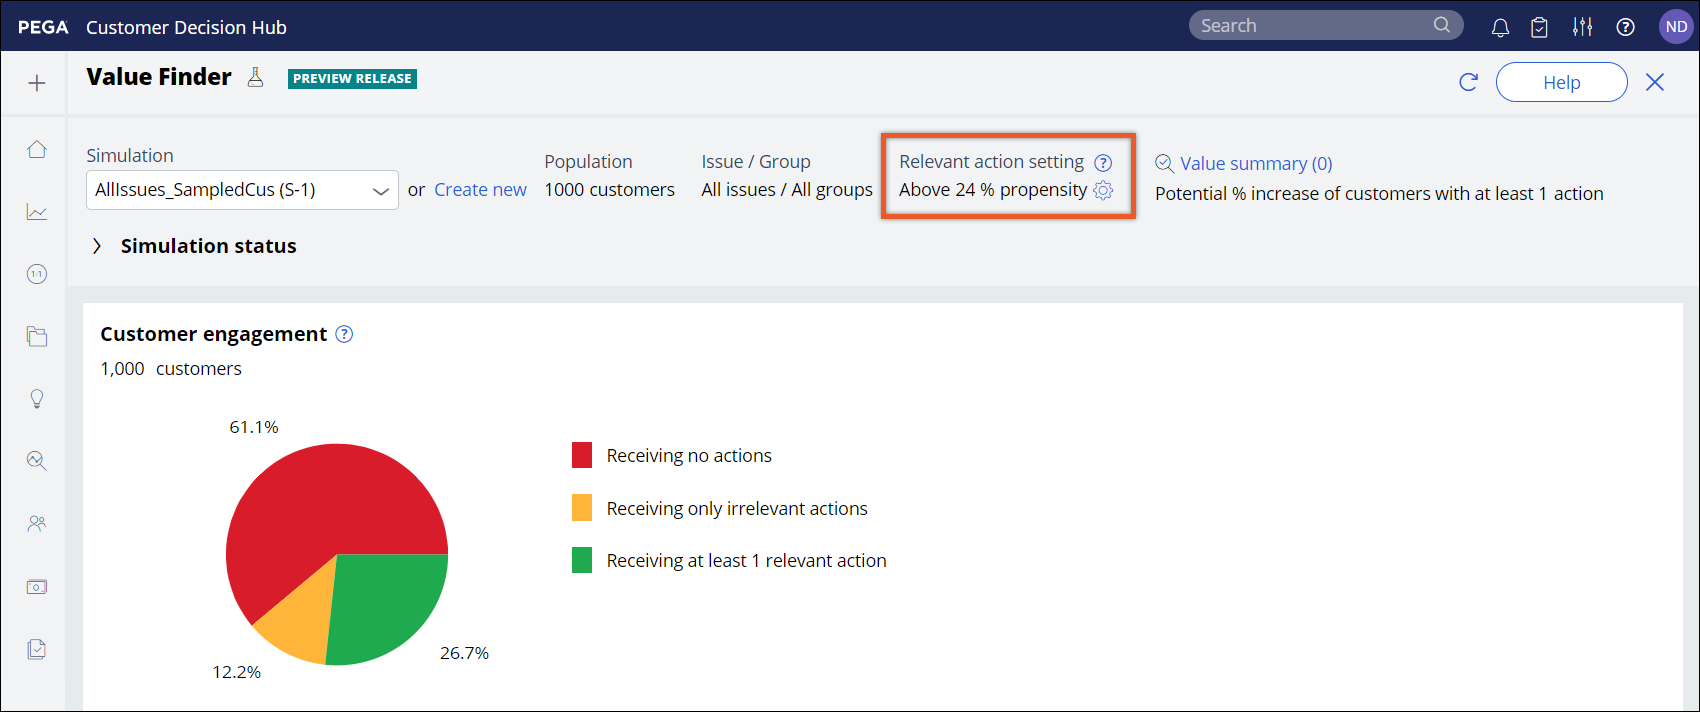 The relevant action setting is located in the header of the Value Finder landing page.